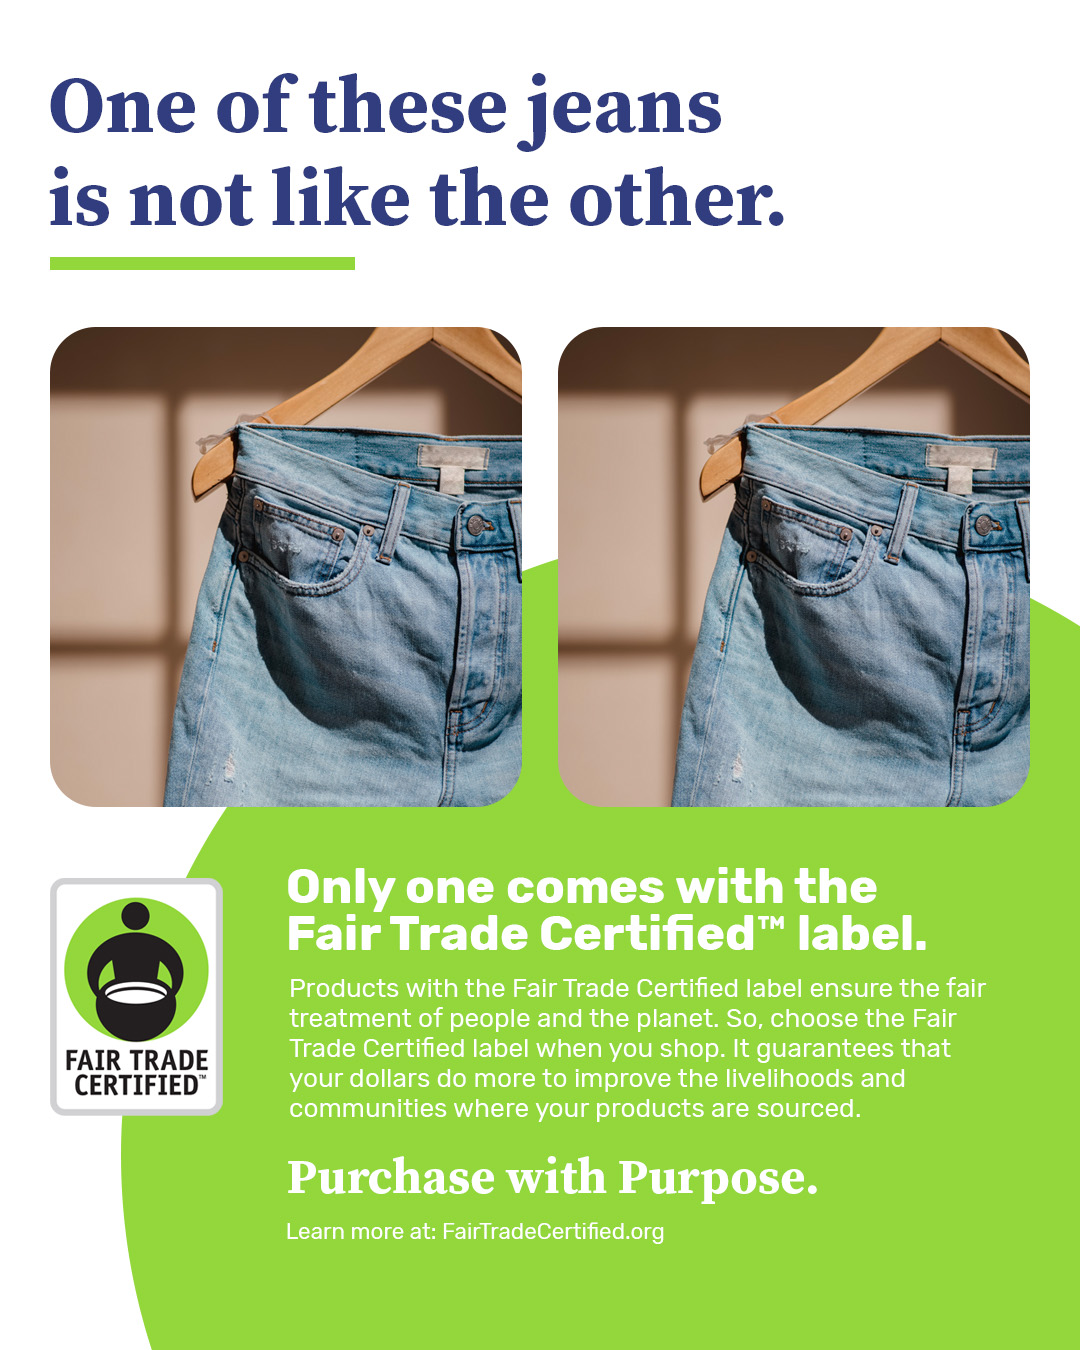 An ad from Fair Trade Certified's 'Purchase With Purpose' campaign that shows two identical photos of jeans, but explains that one is not like the other because one features the Fair Trade Certified label.